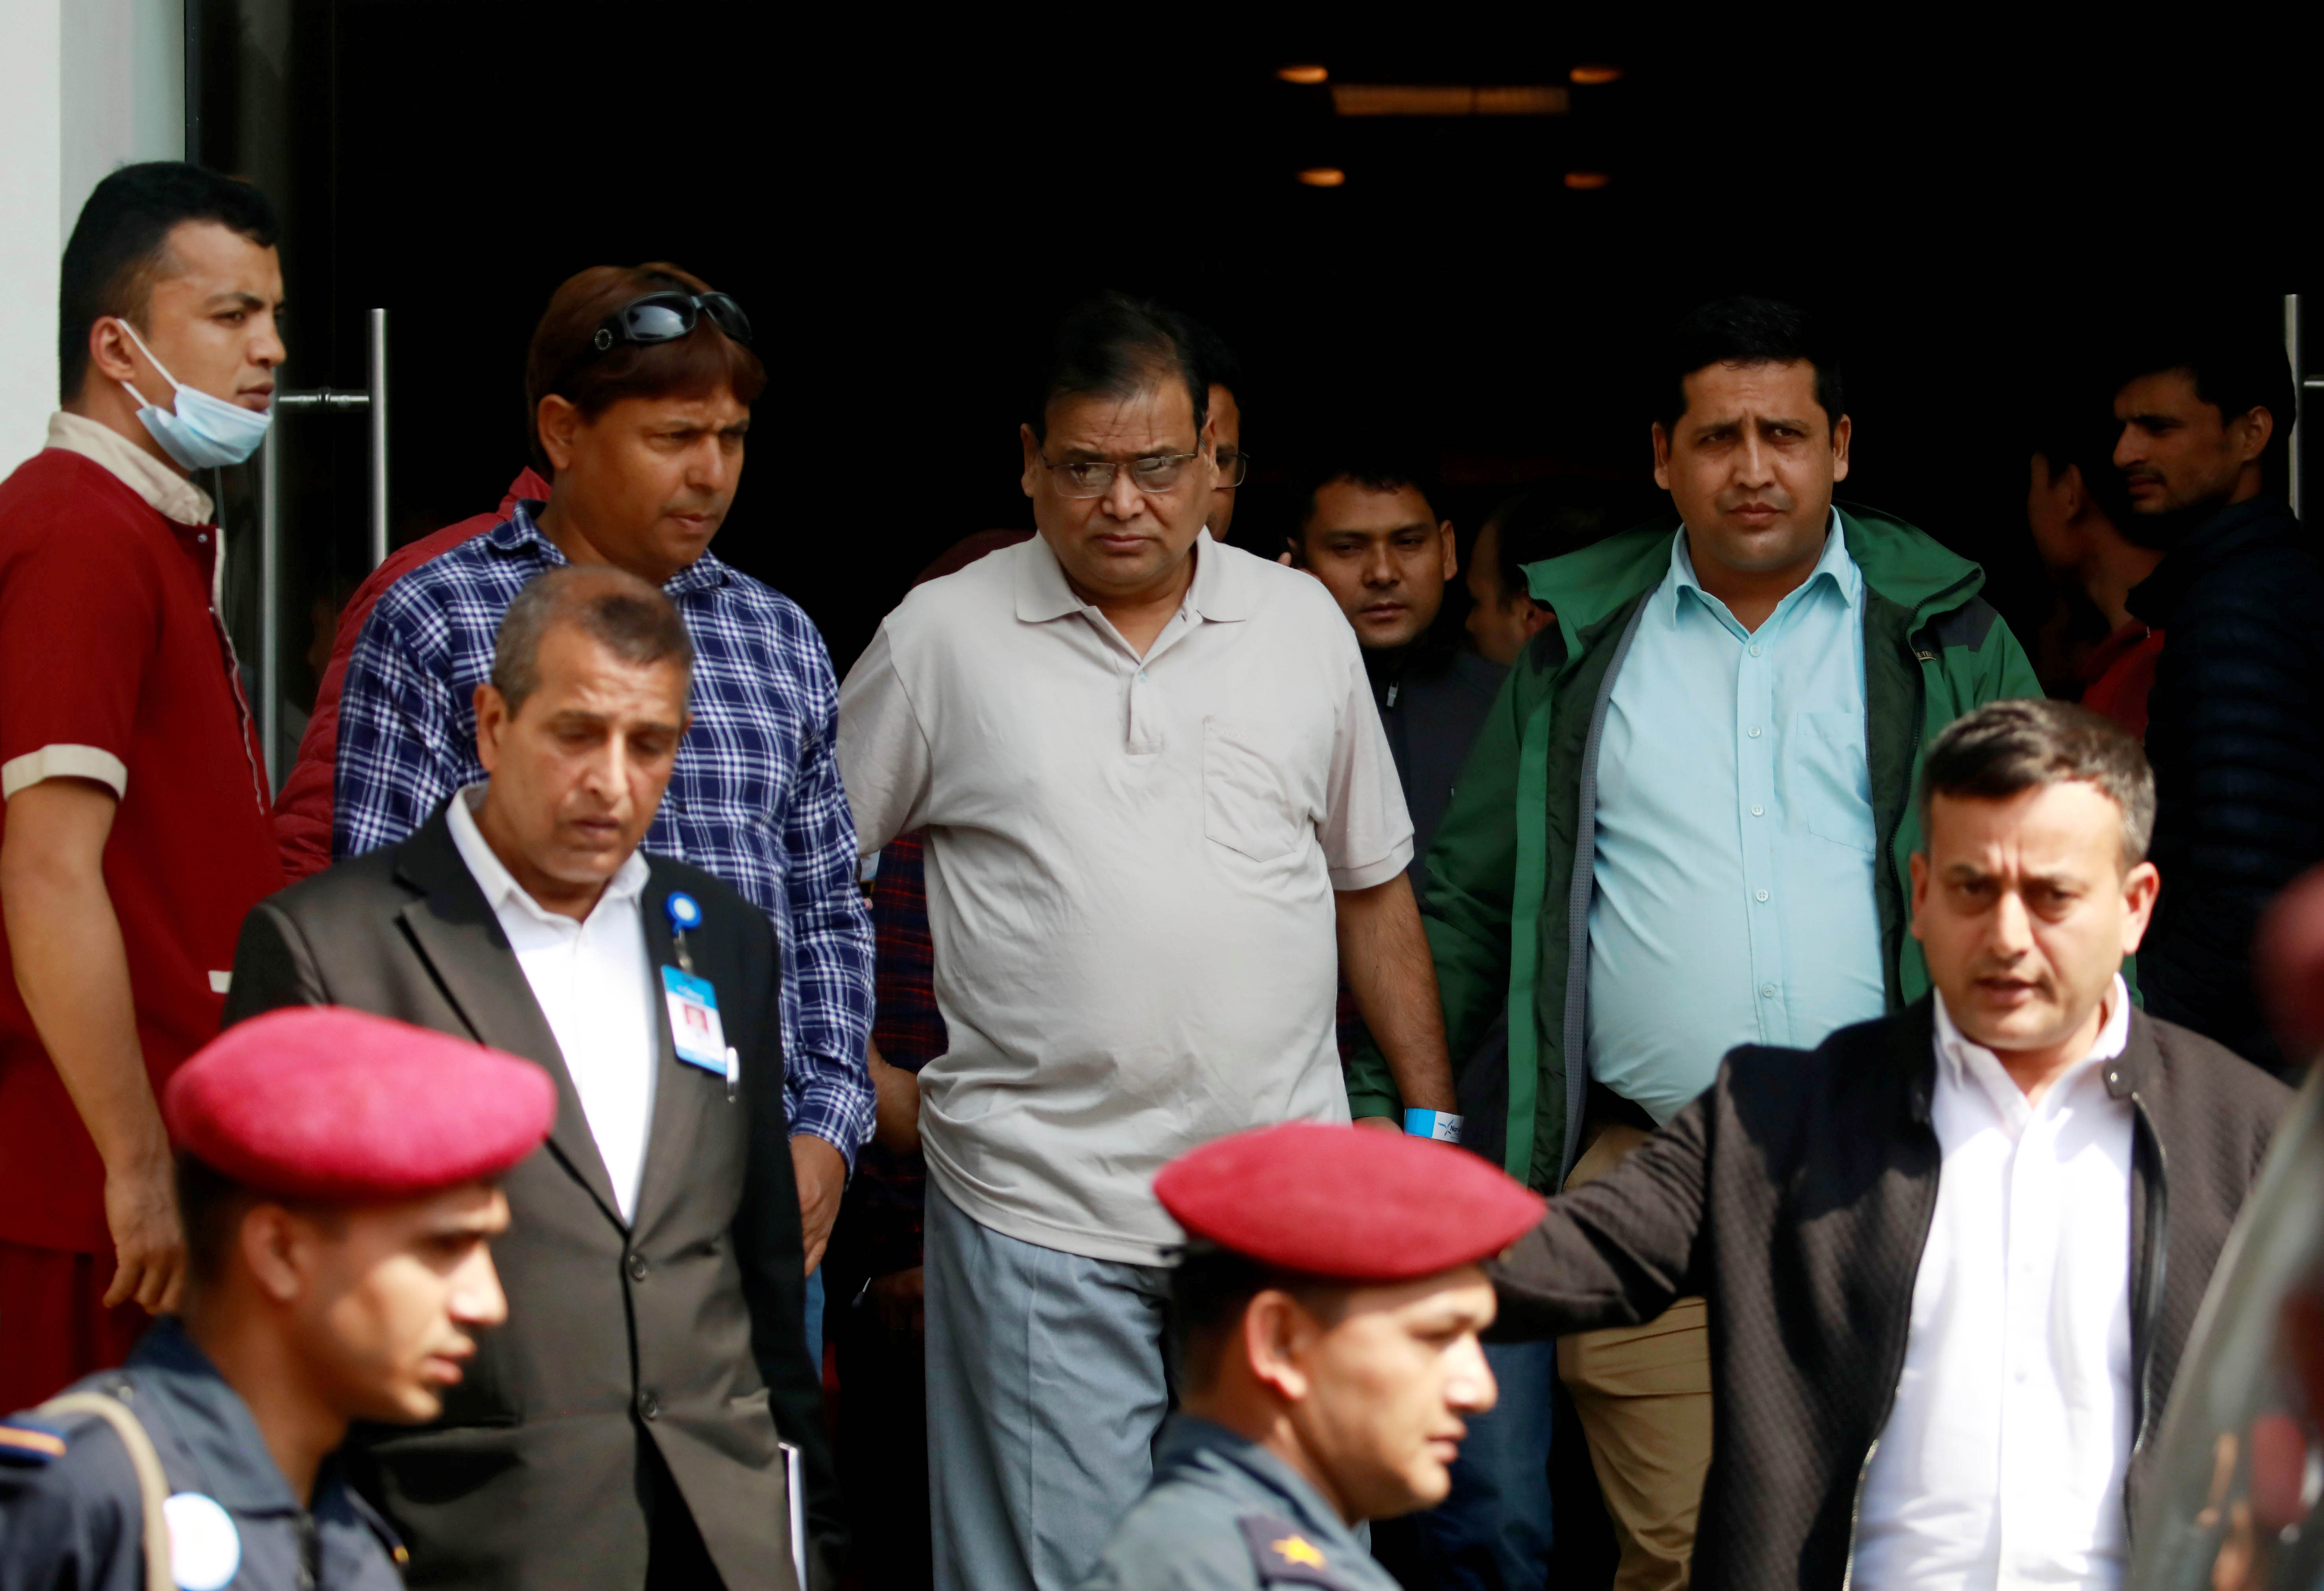 Krishna Bahadur Mahara (C) who resigned from his post as a speaker of the House of Representatives in Nepal's parliament after an accusation made by a female parliament employee that he raped her, heads towards the court in Kathmandu, Nepal October 15, 2019. Photo: Reuters